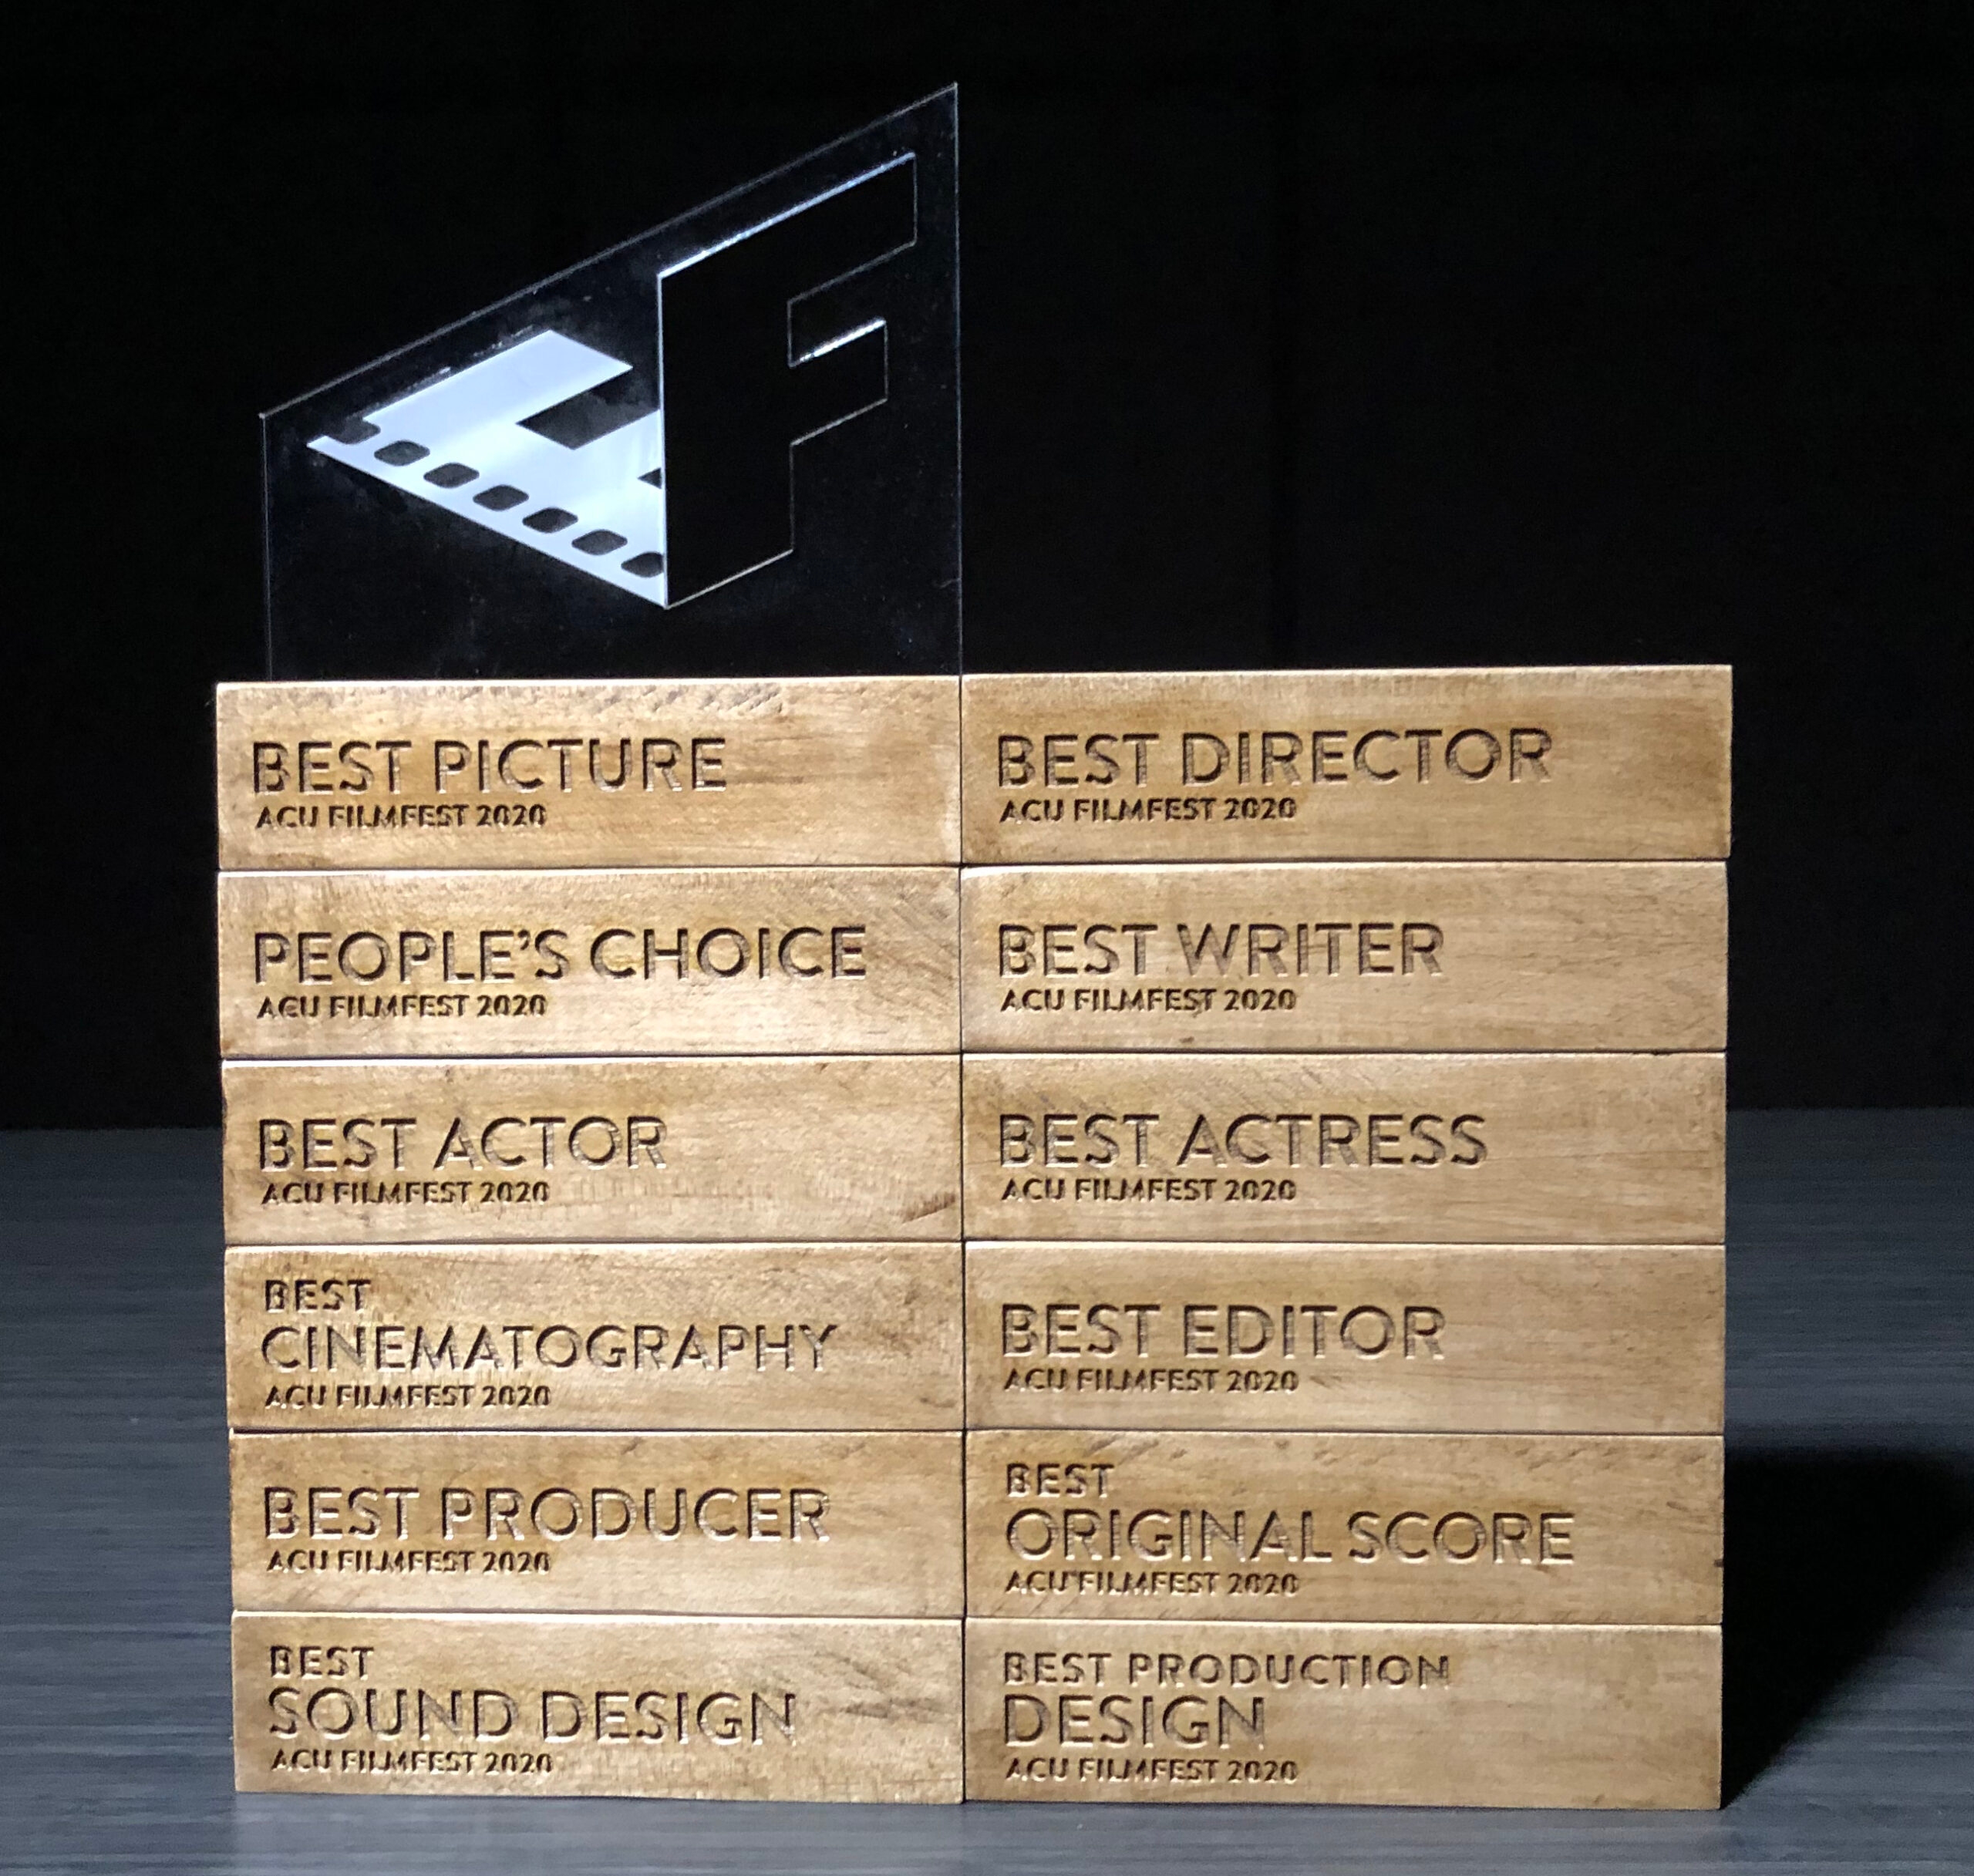 The awards given in acting, production, and technical categories during the gala were produced by Learning Studio and Maker Lab staff.